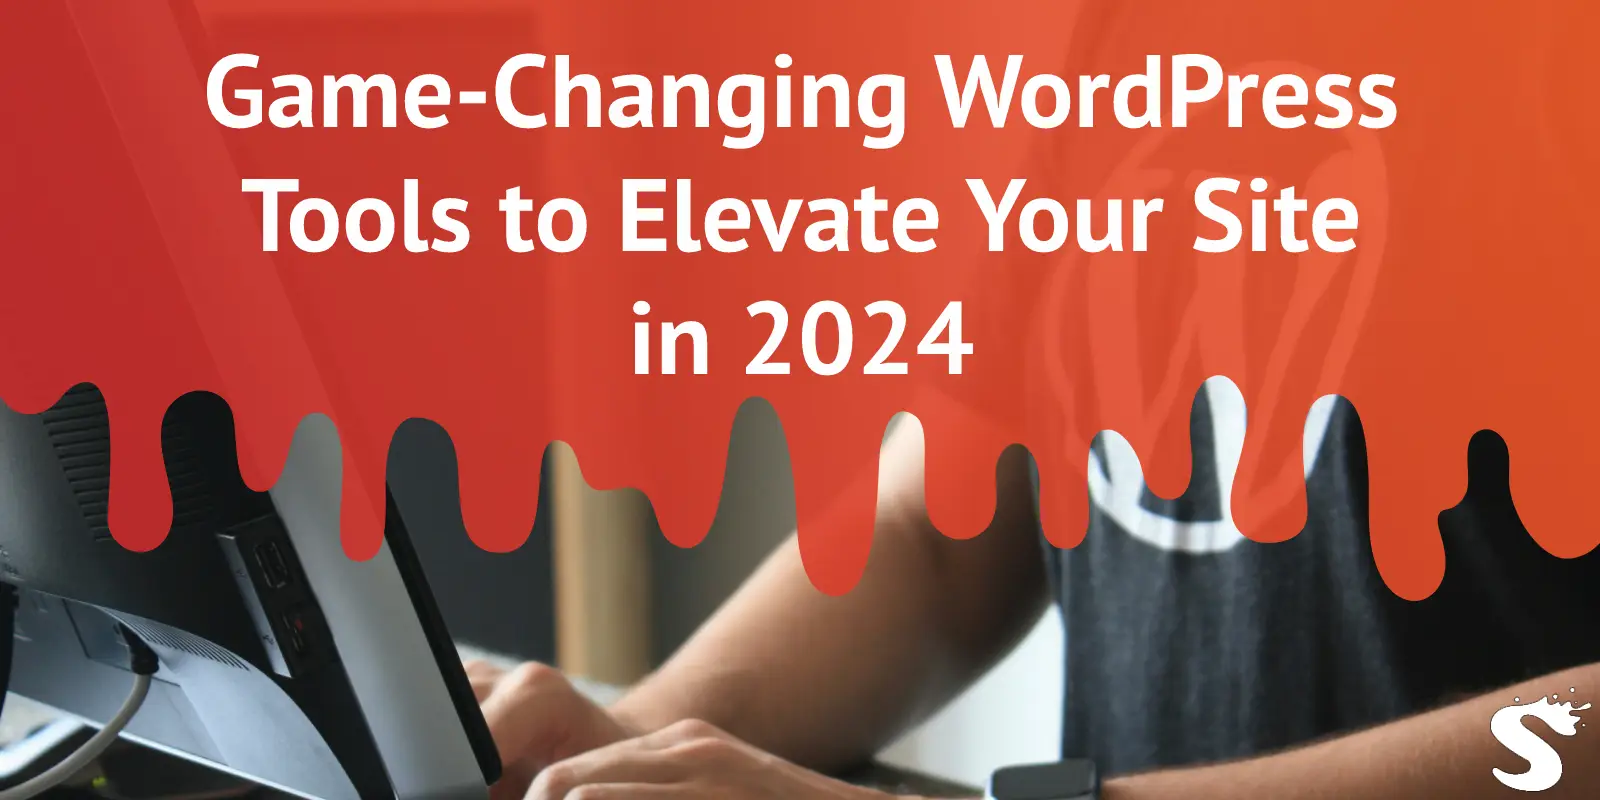 Game-Changing WordPress Tools to Elevate Your Site in 2024